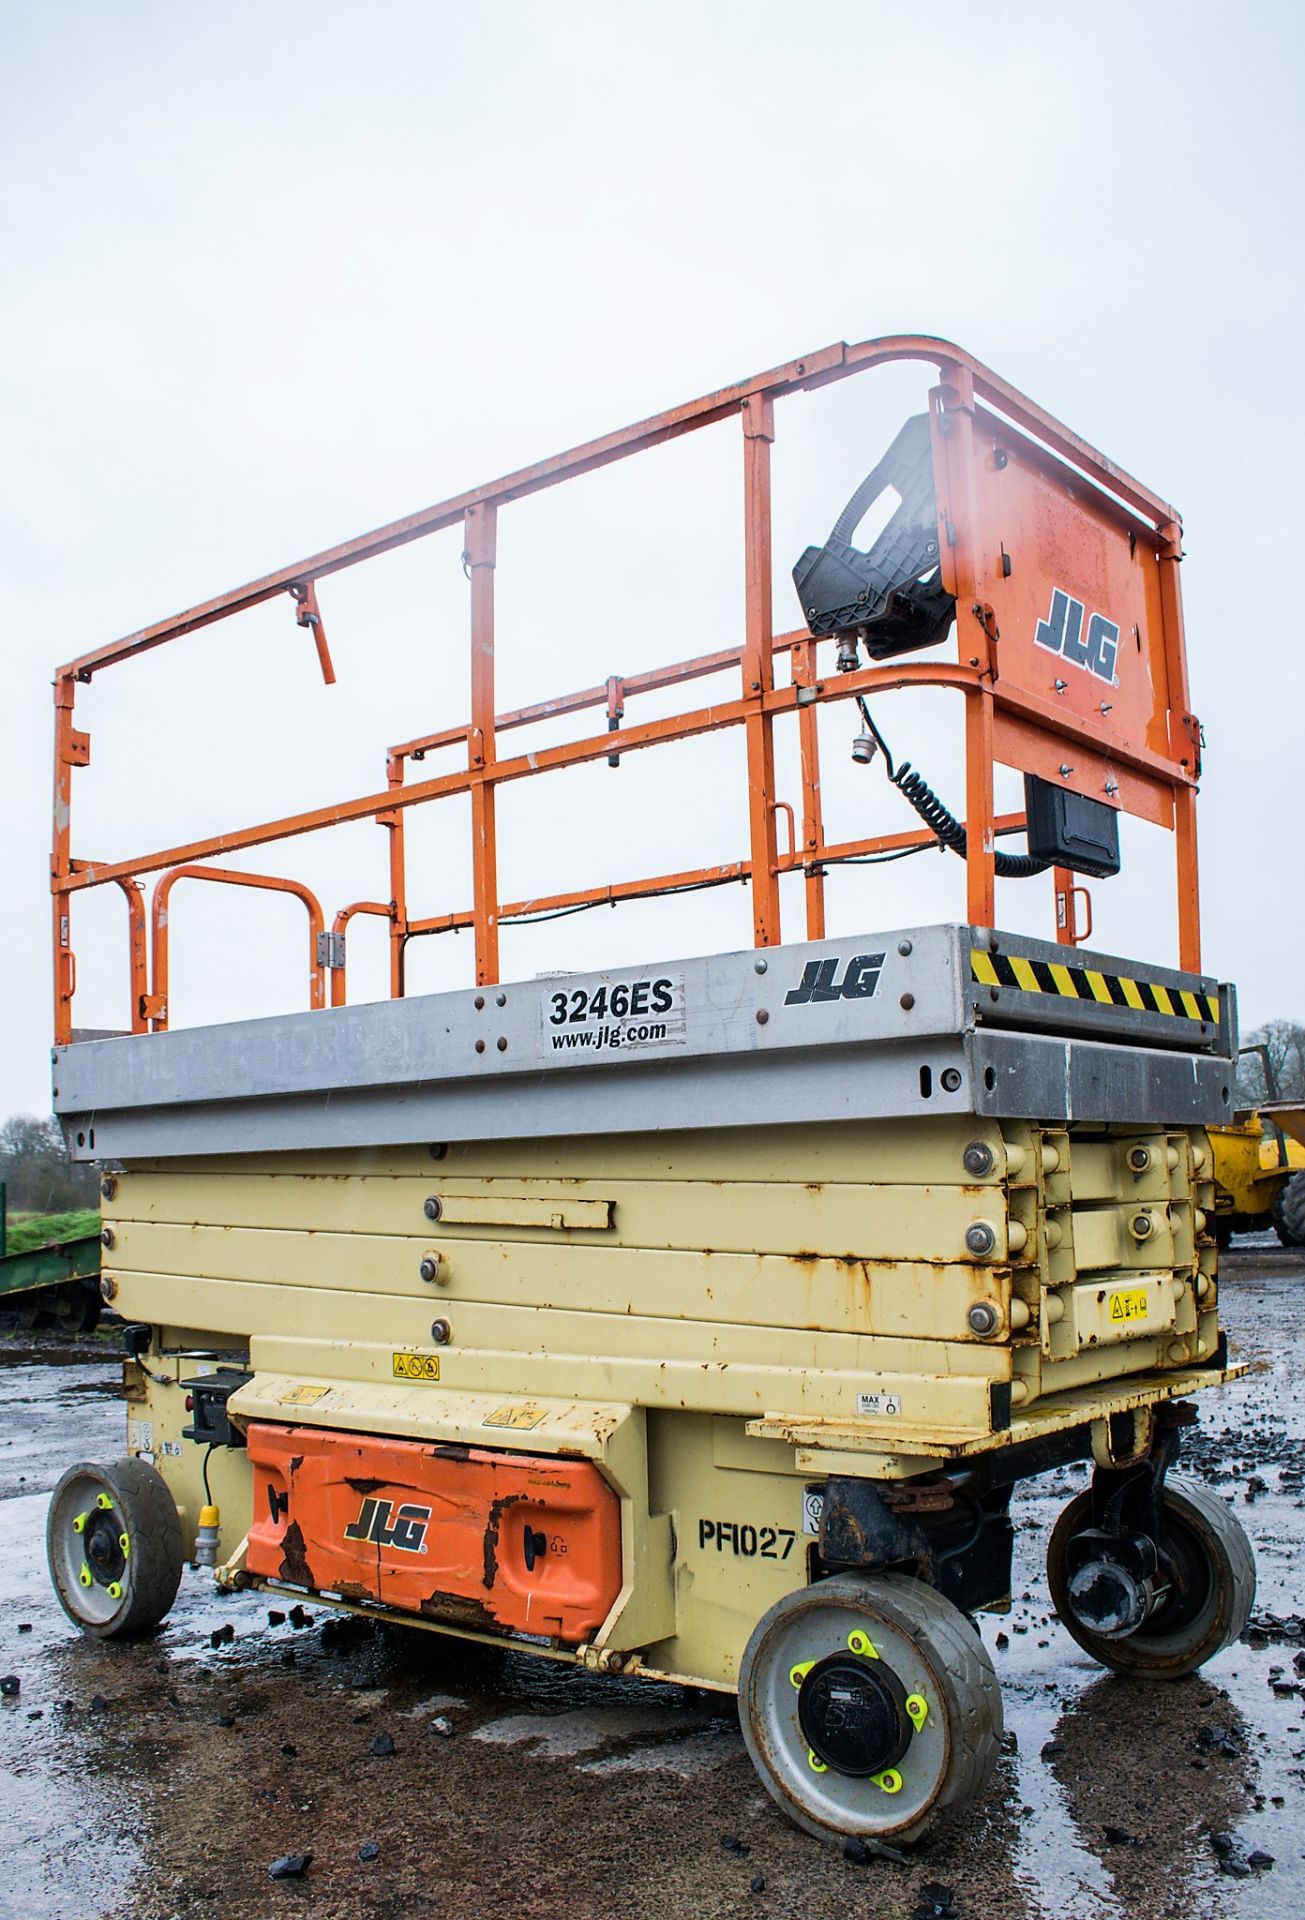 JLG 3246ES battery electric scissor lift access platform Year: 2010 S/N: 023605 Recorded Hours: